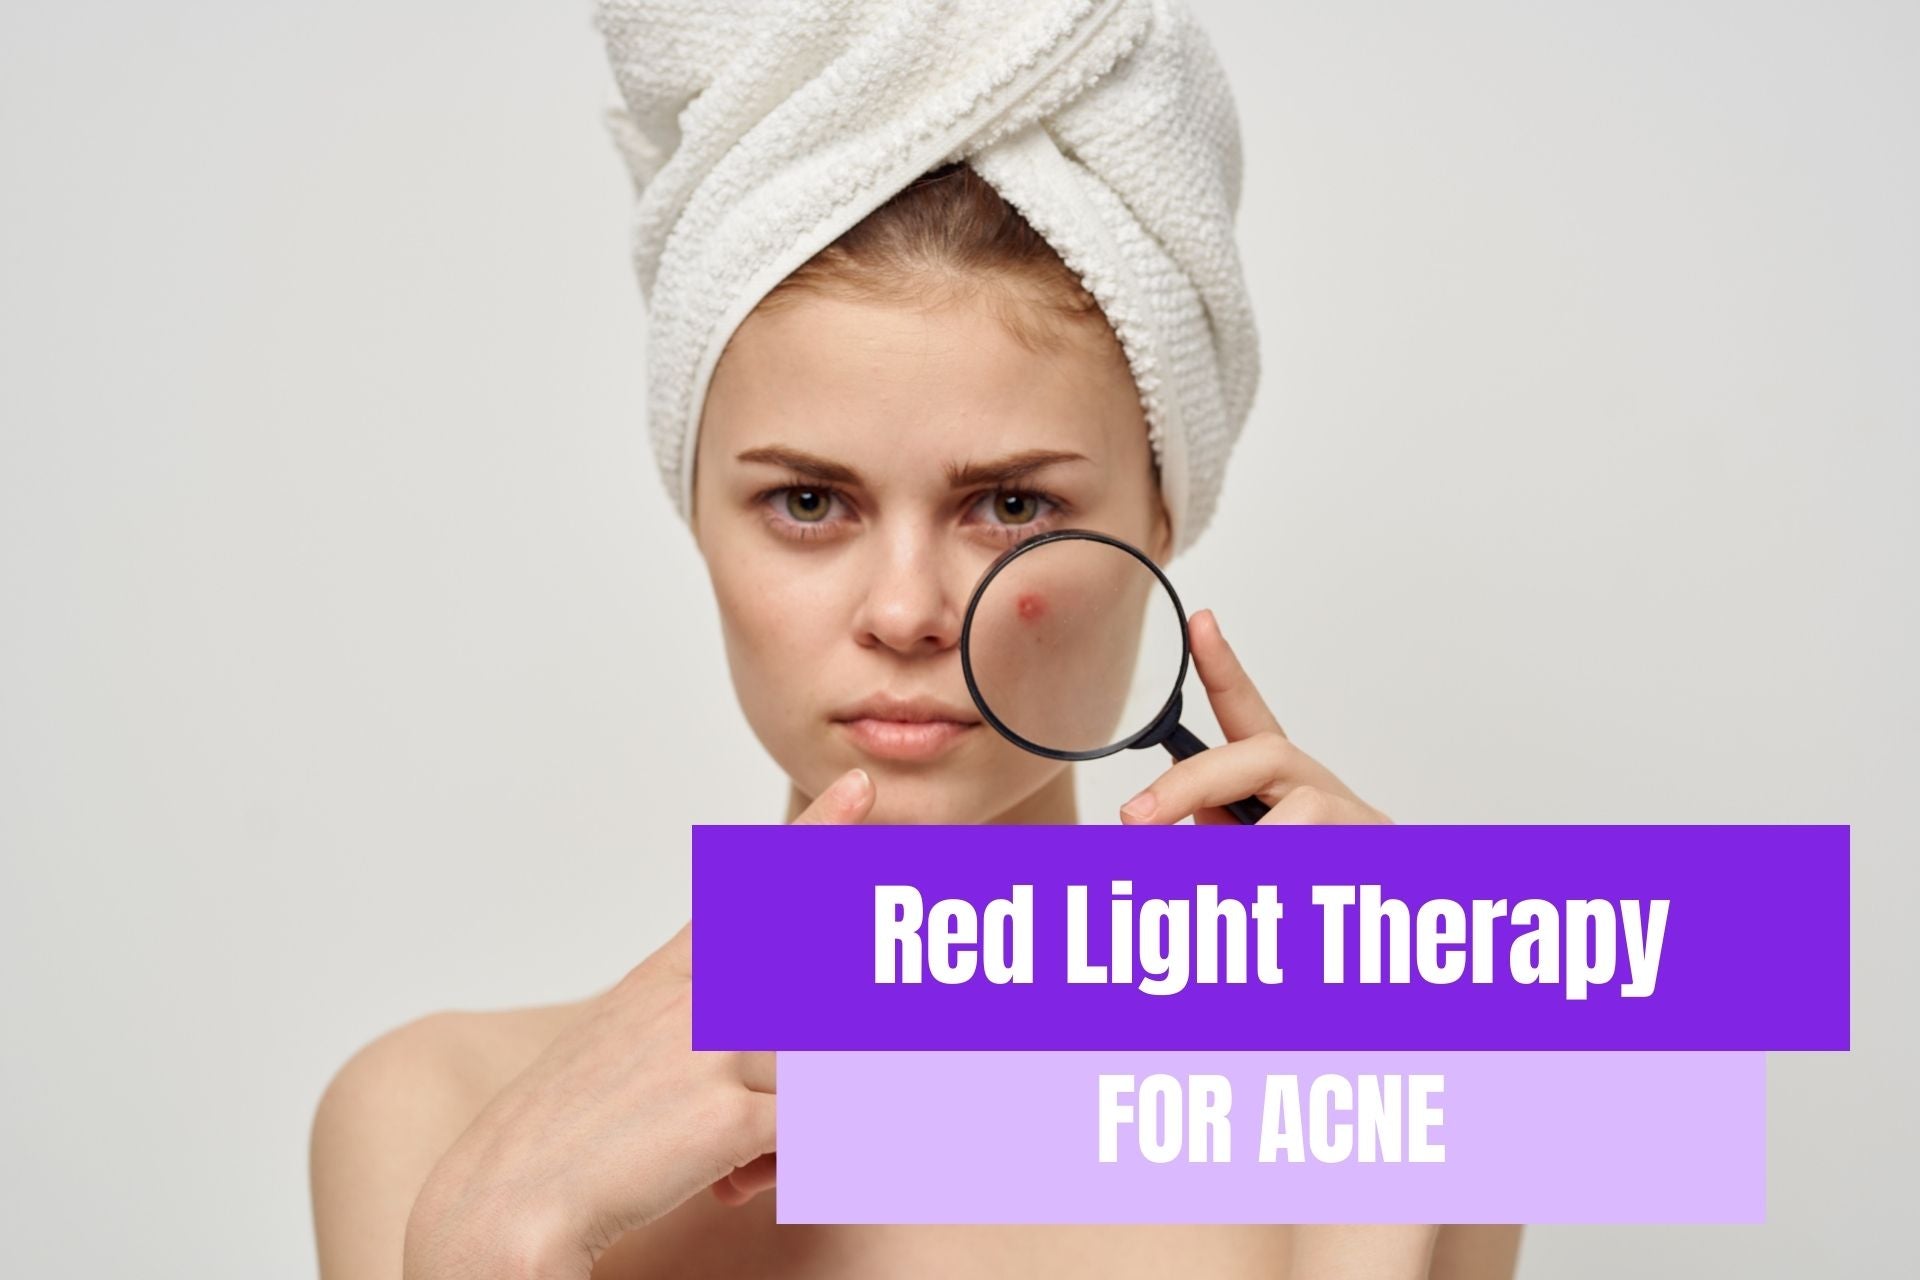 Red Light Therapy For Acne: Can It Help?